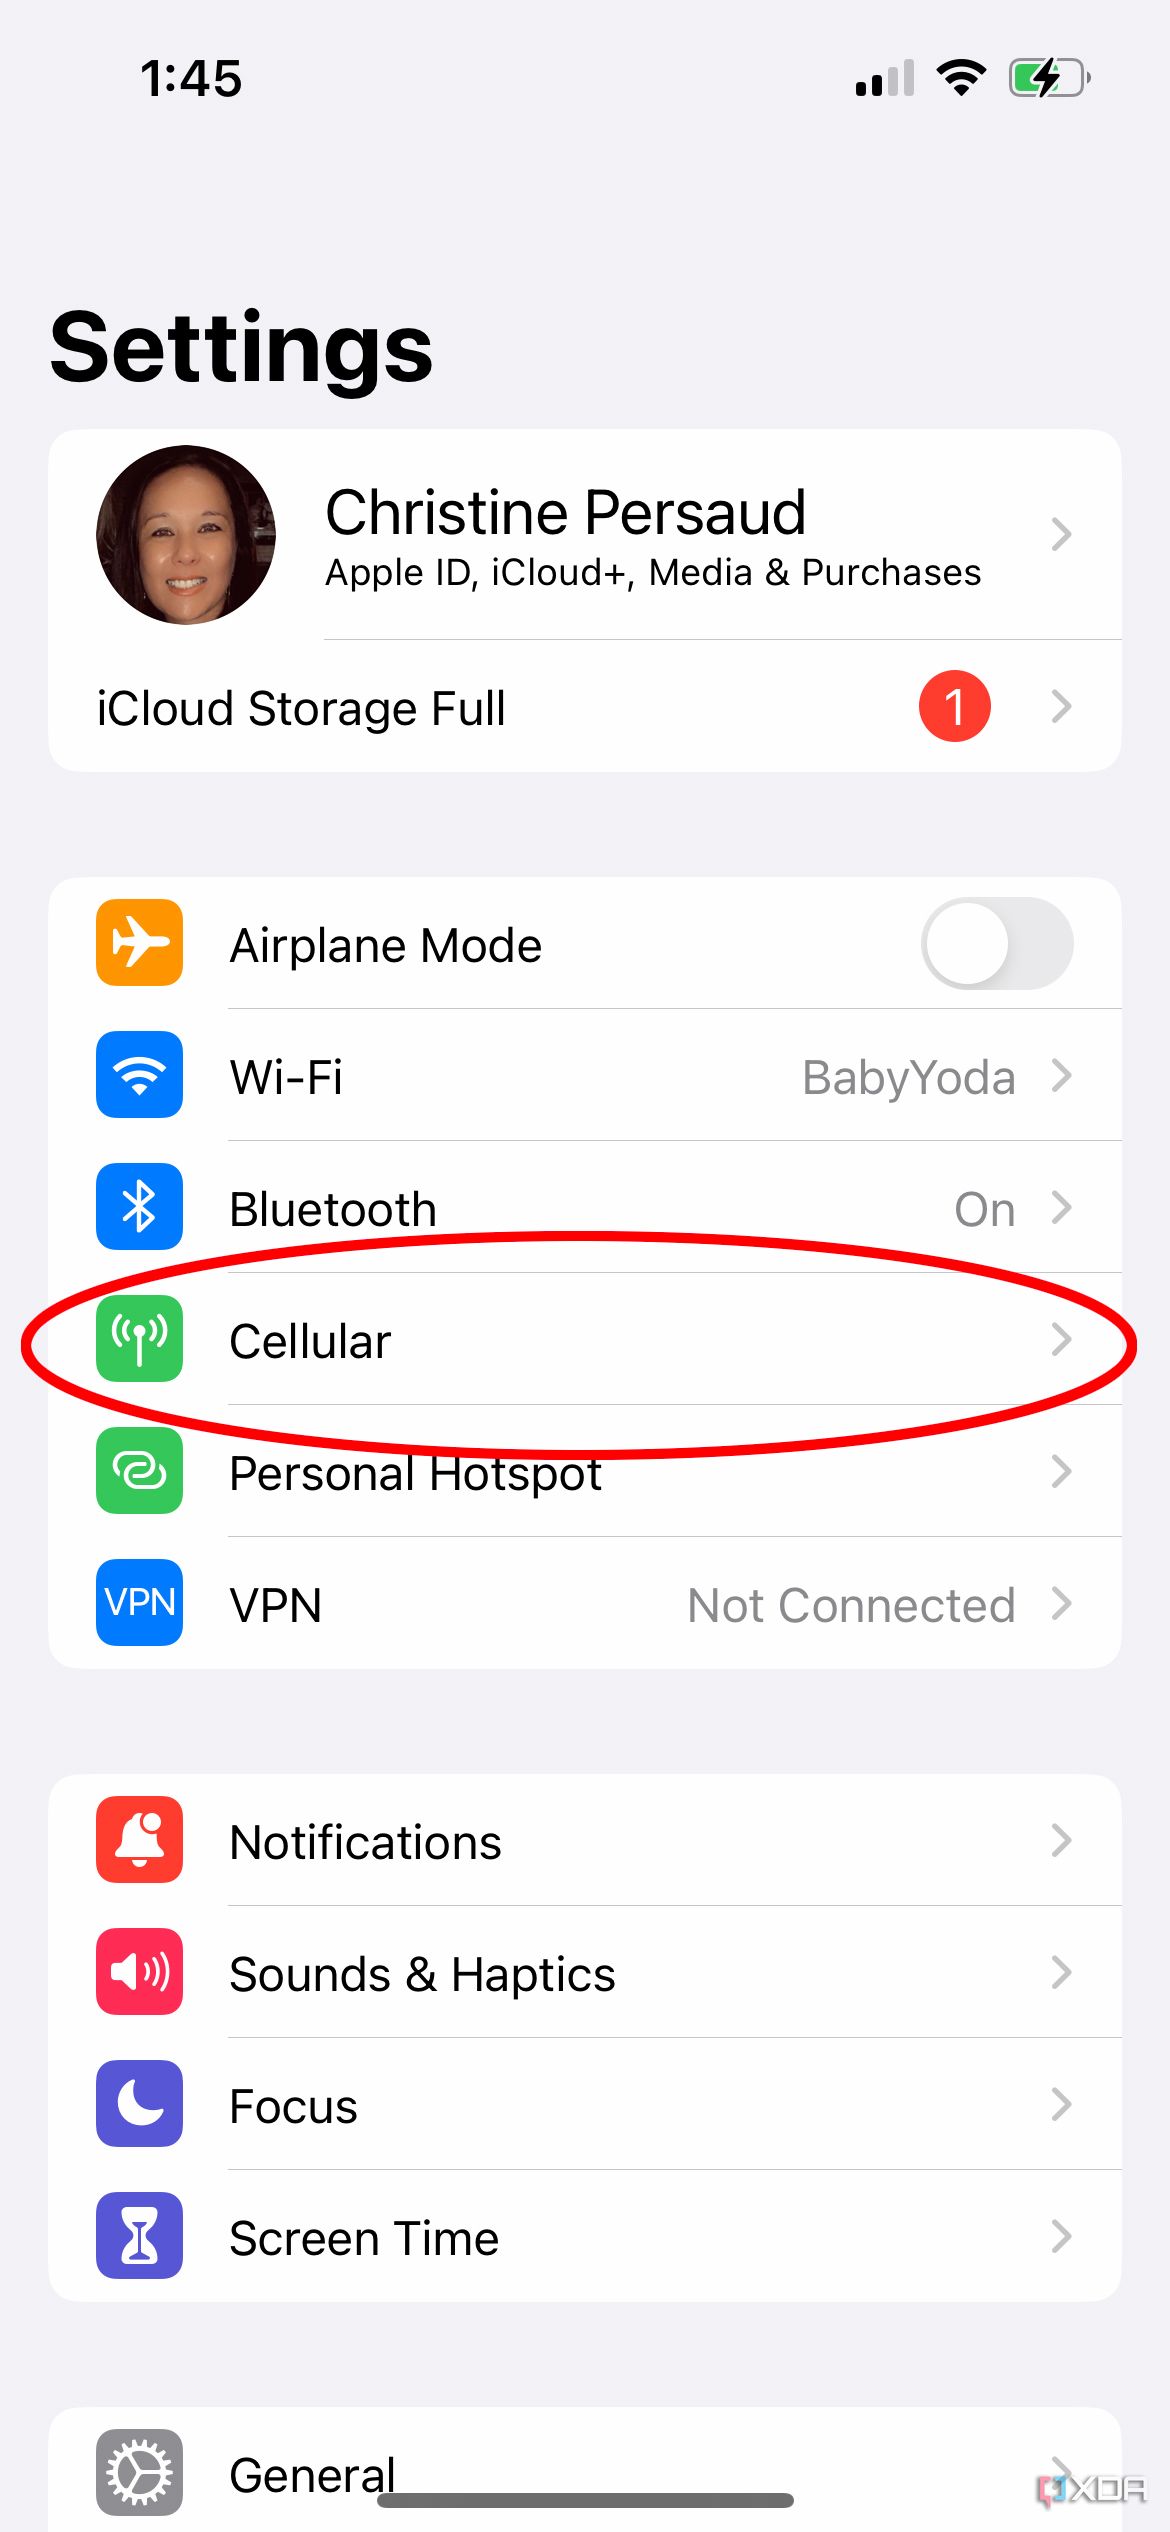 iPhone settings menu with Cellular highlighted